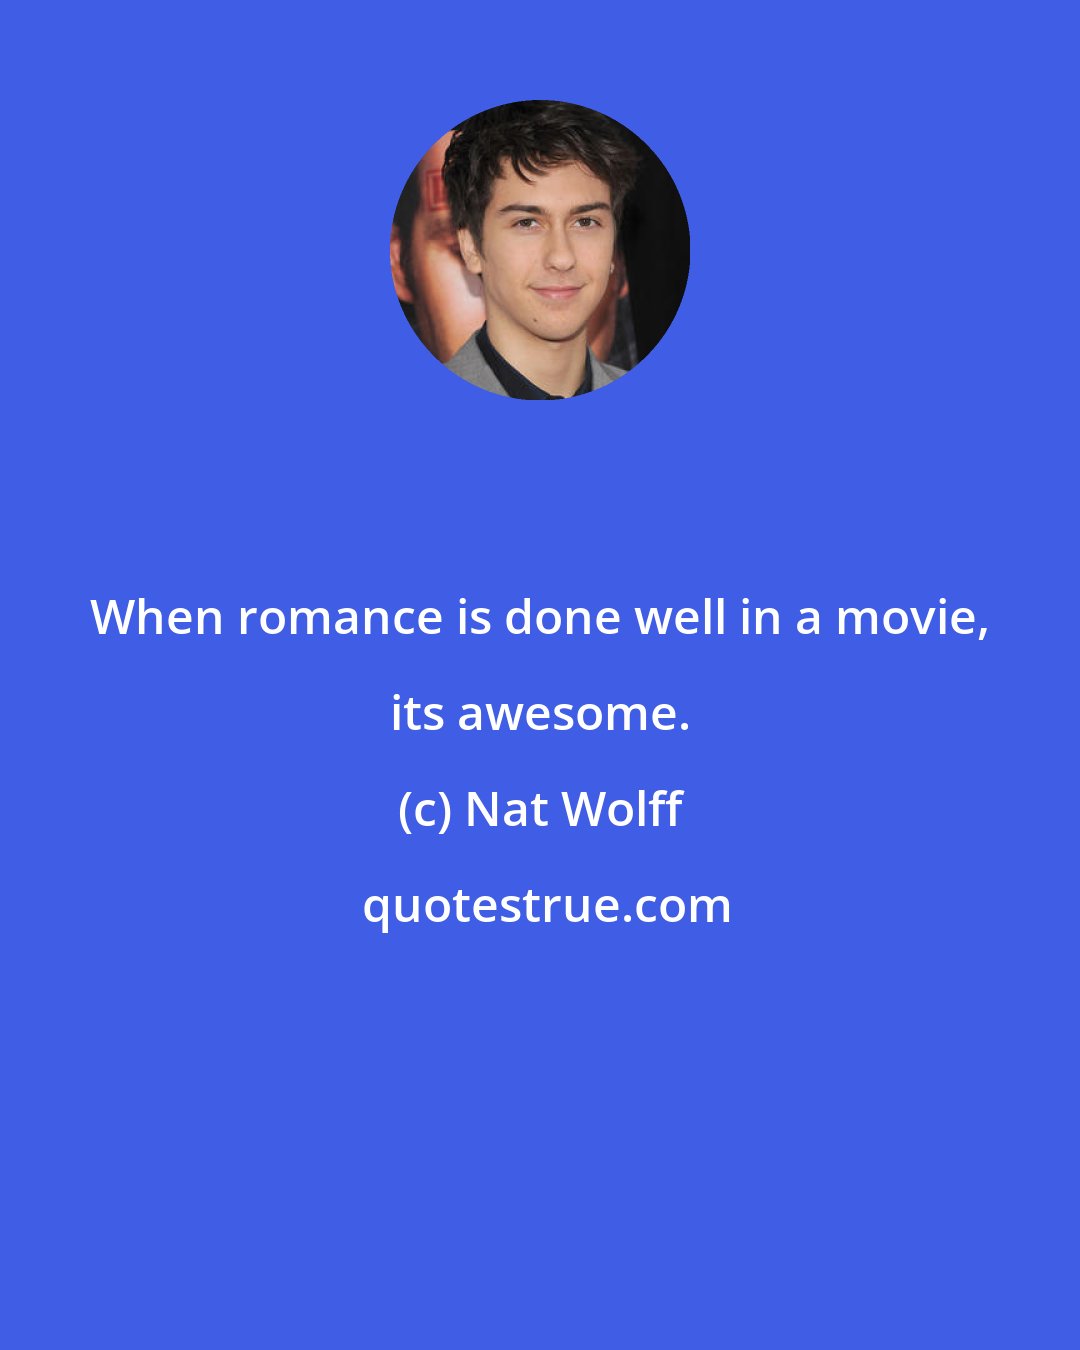 Nat Wolff: When romance is done well in a movie, its awesome.